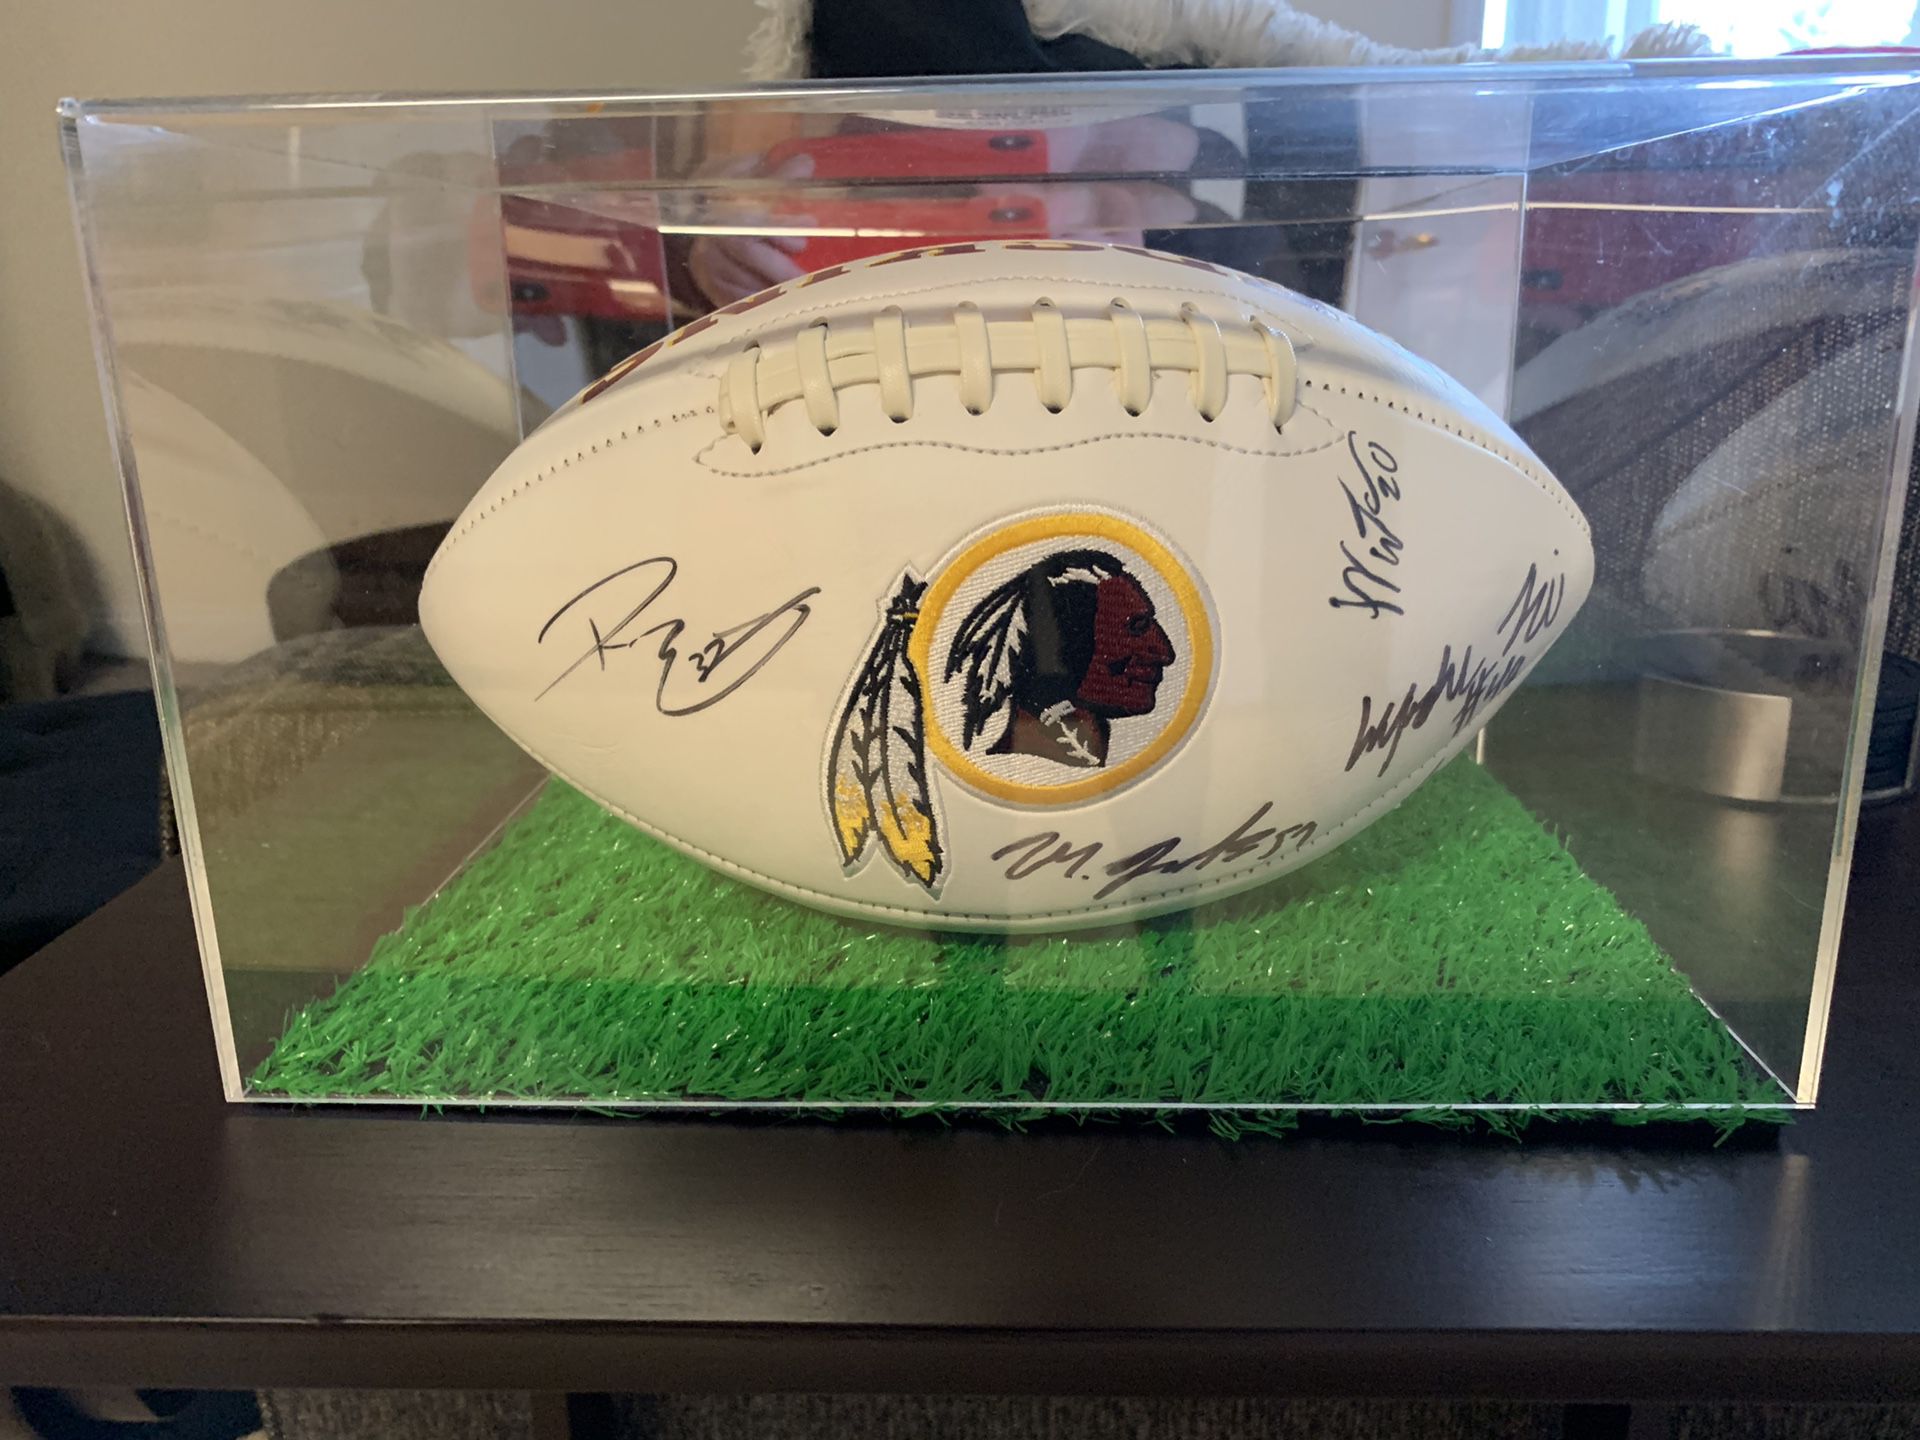 Redskins signed Josh Norman football comes with display case